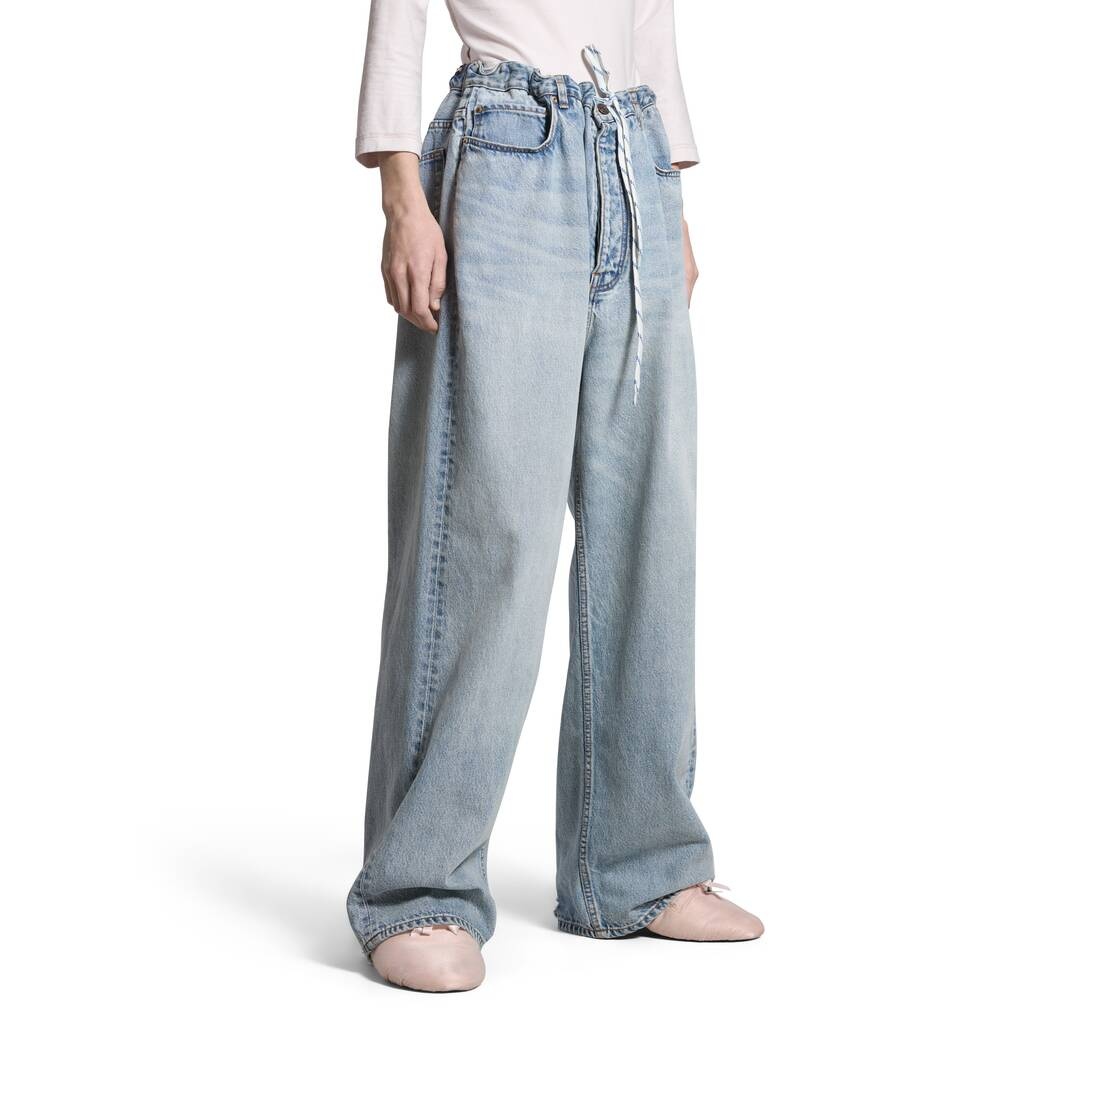 Oversized Baggy Pants in Blue - 5